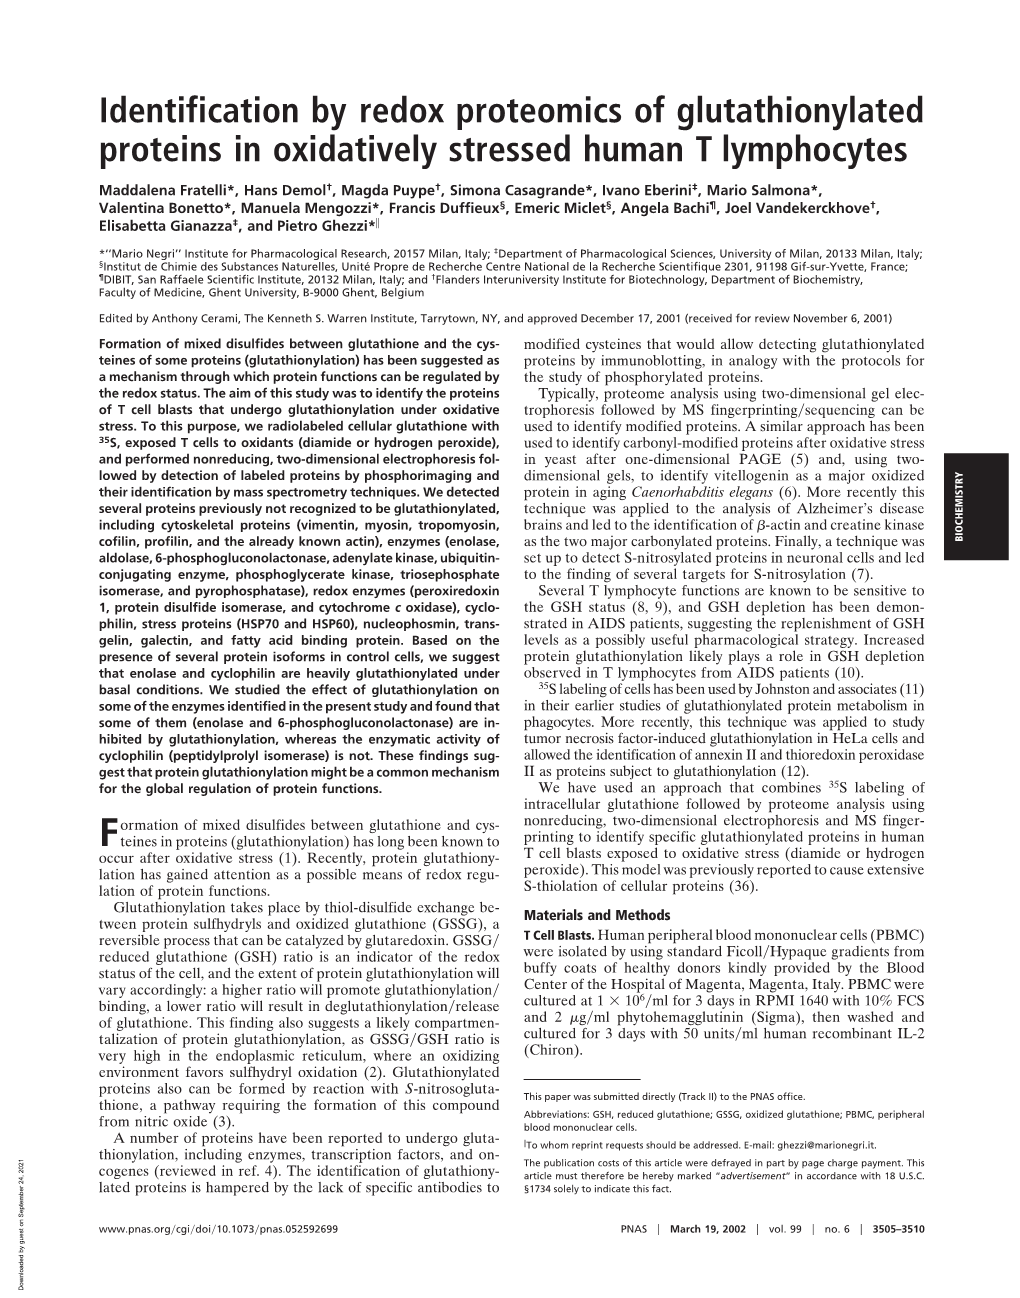 Identification by Redox Proteomics of Glutathionylated Proteins in Oxidatively Stressed Human T Lymphocytes